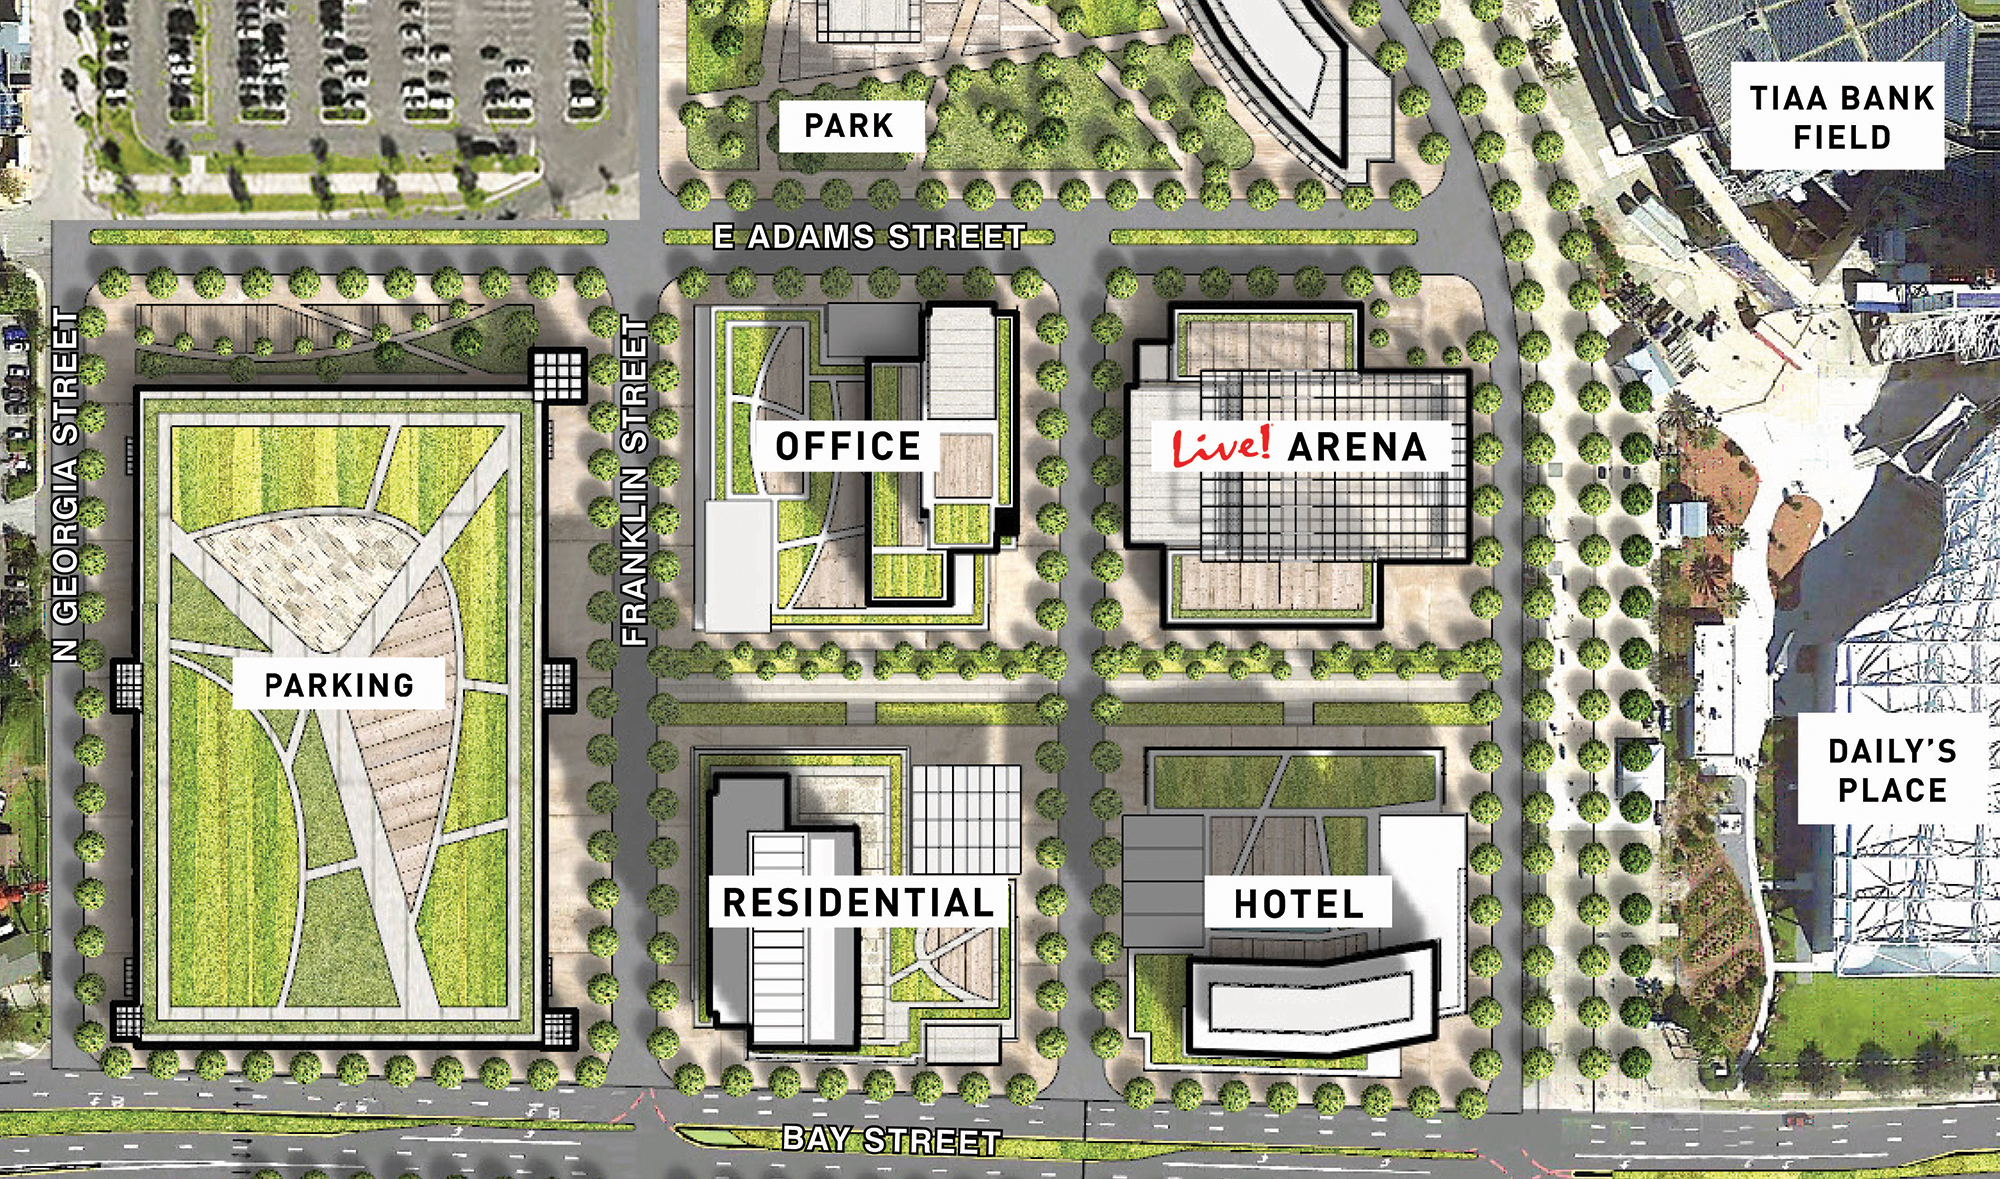 A map of the Lot J site west of TIAA Bank Field and Daily’s Place.